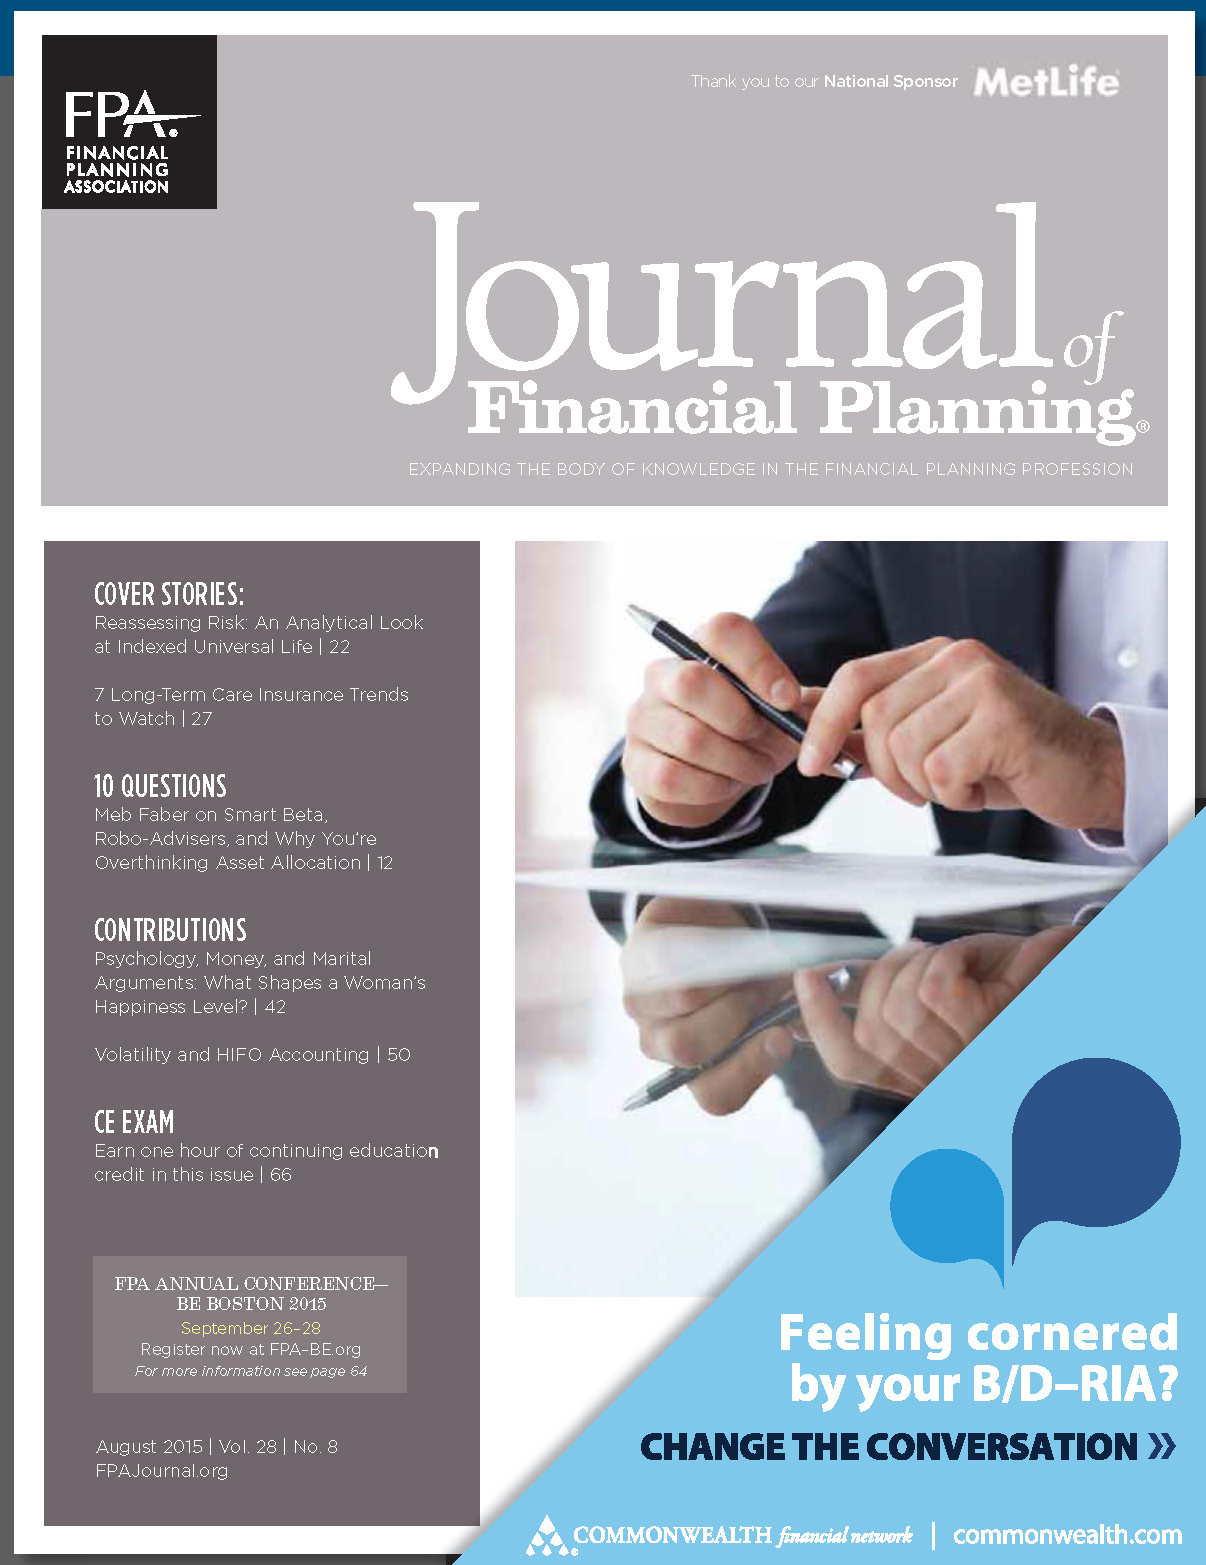 Financial Planning Association (FPA) - Journal of Financial Planning magazine article